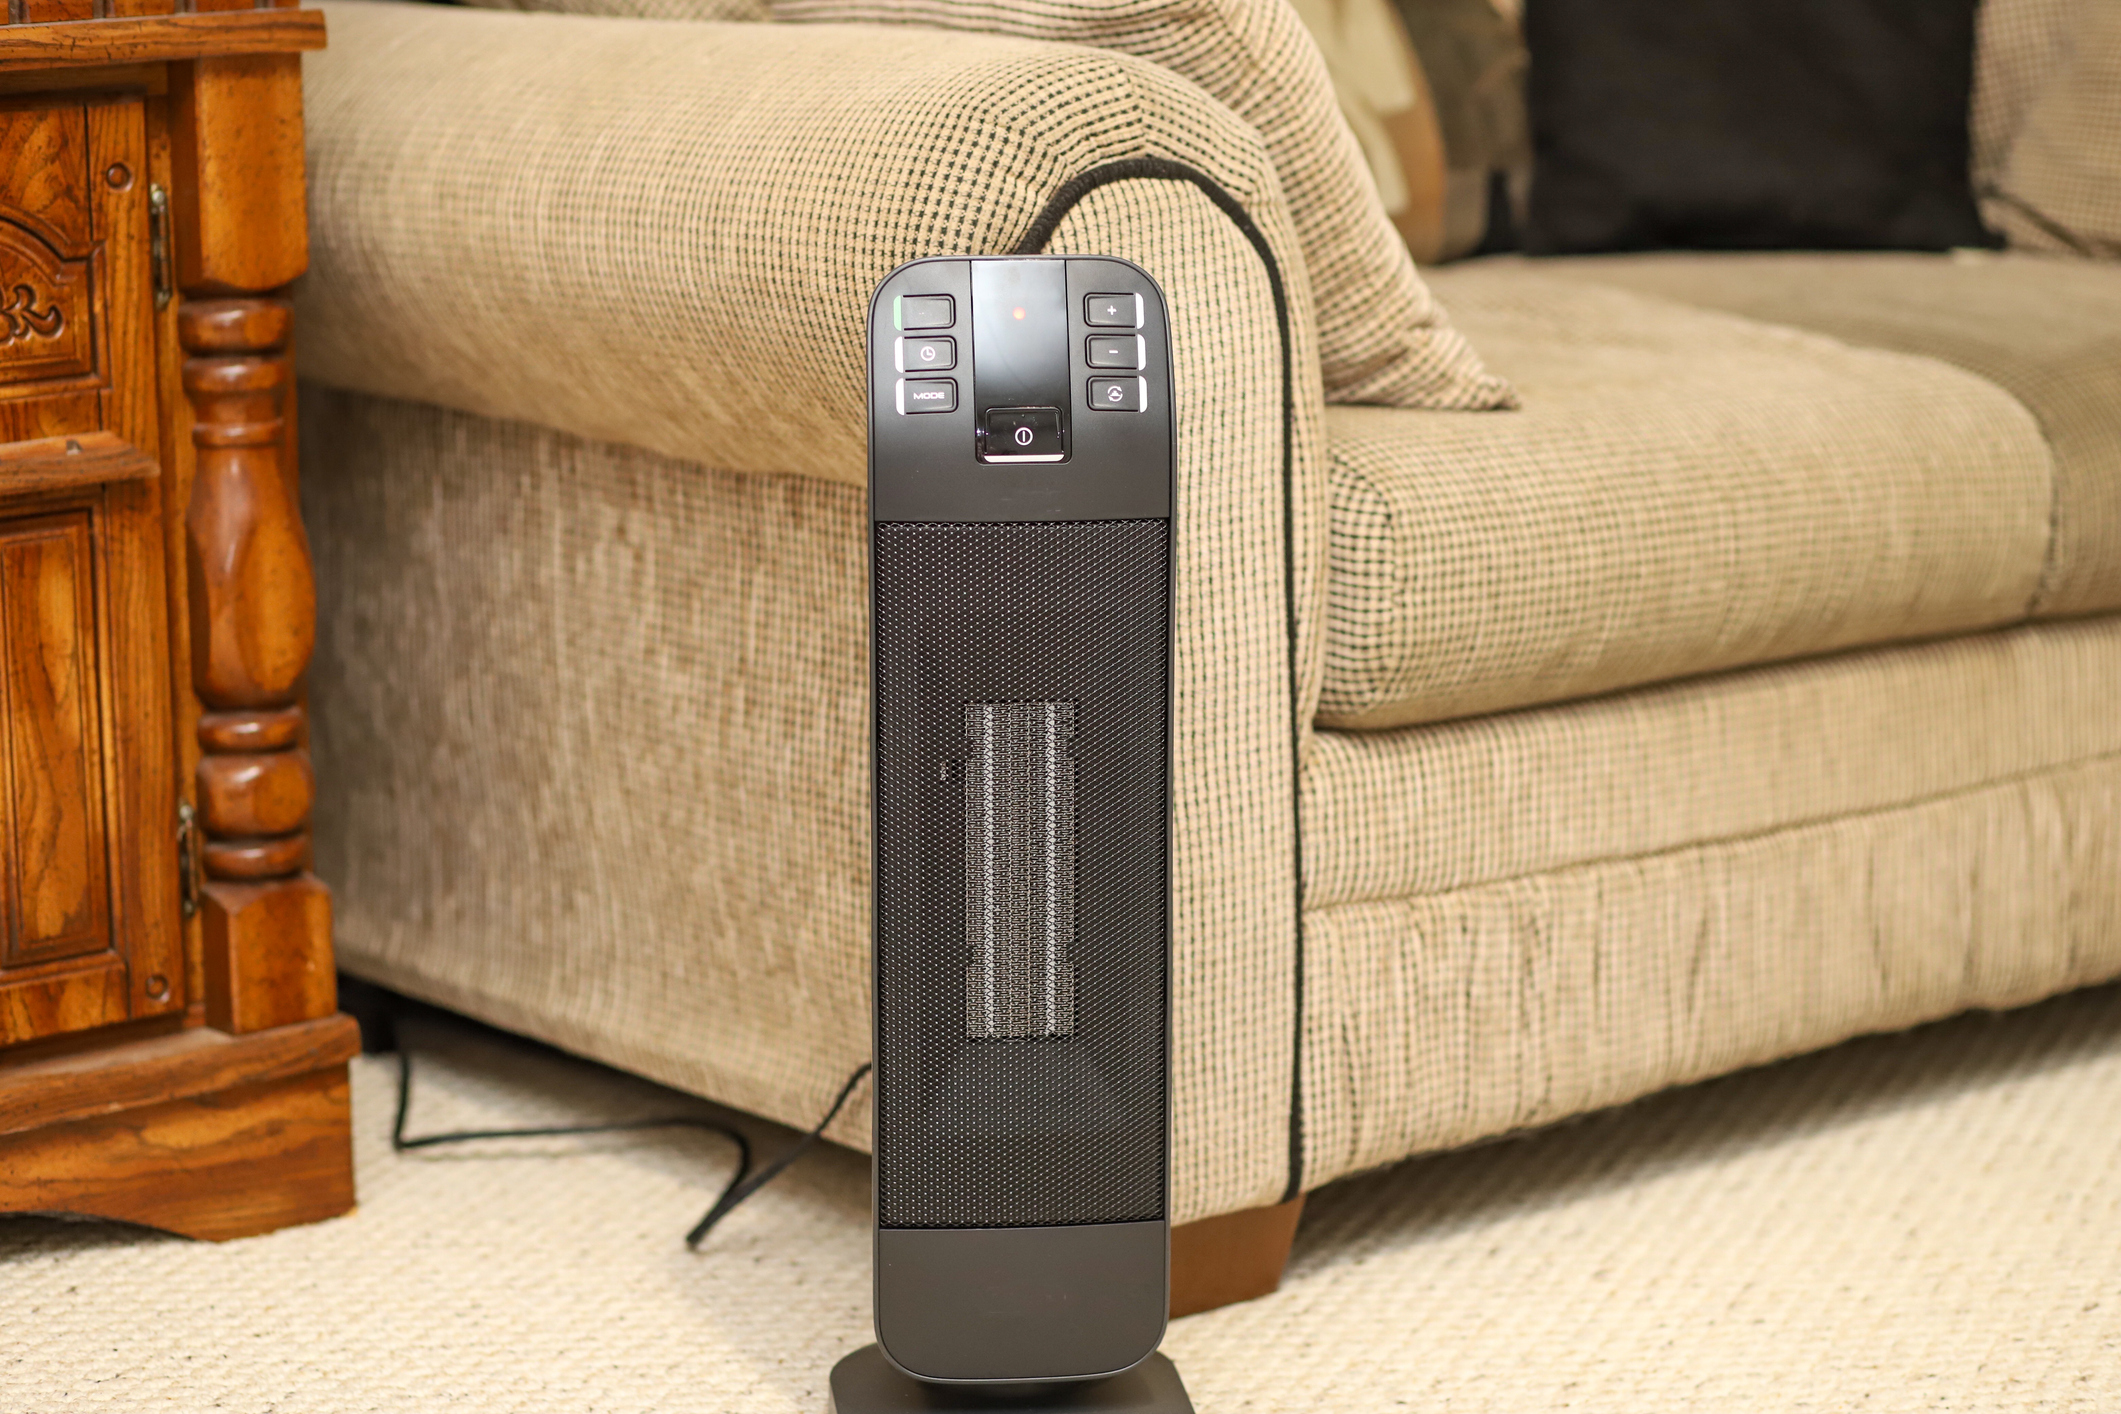 A space heater in front of a couch.